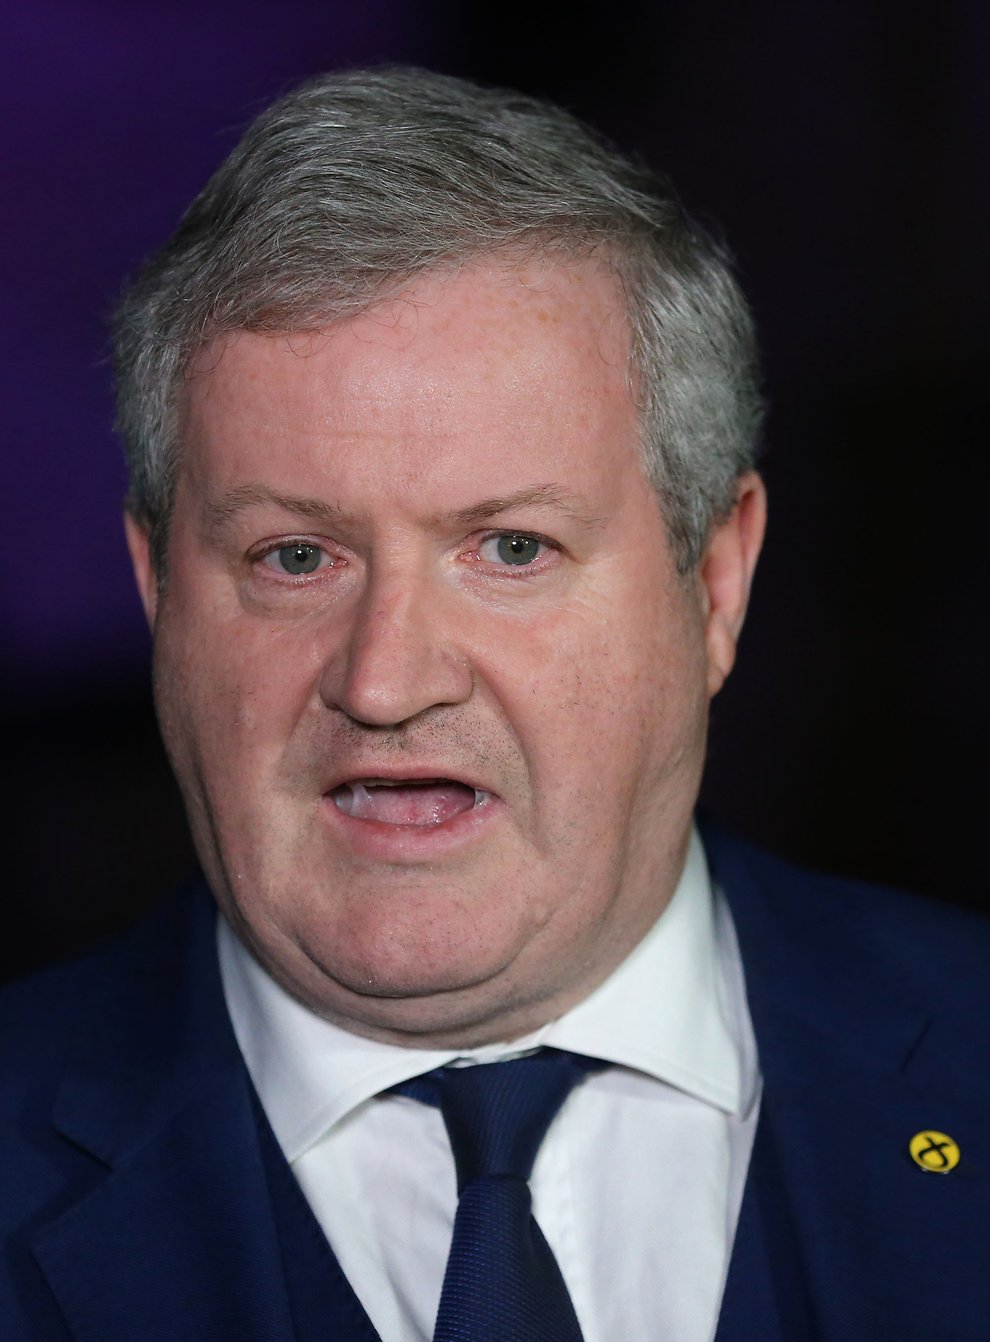 Ian Blackford said Vladimir Putin should not be allowed to determine the timing of a second Scottish independence referendum (Isabel Infantes/PA)